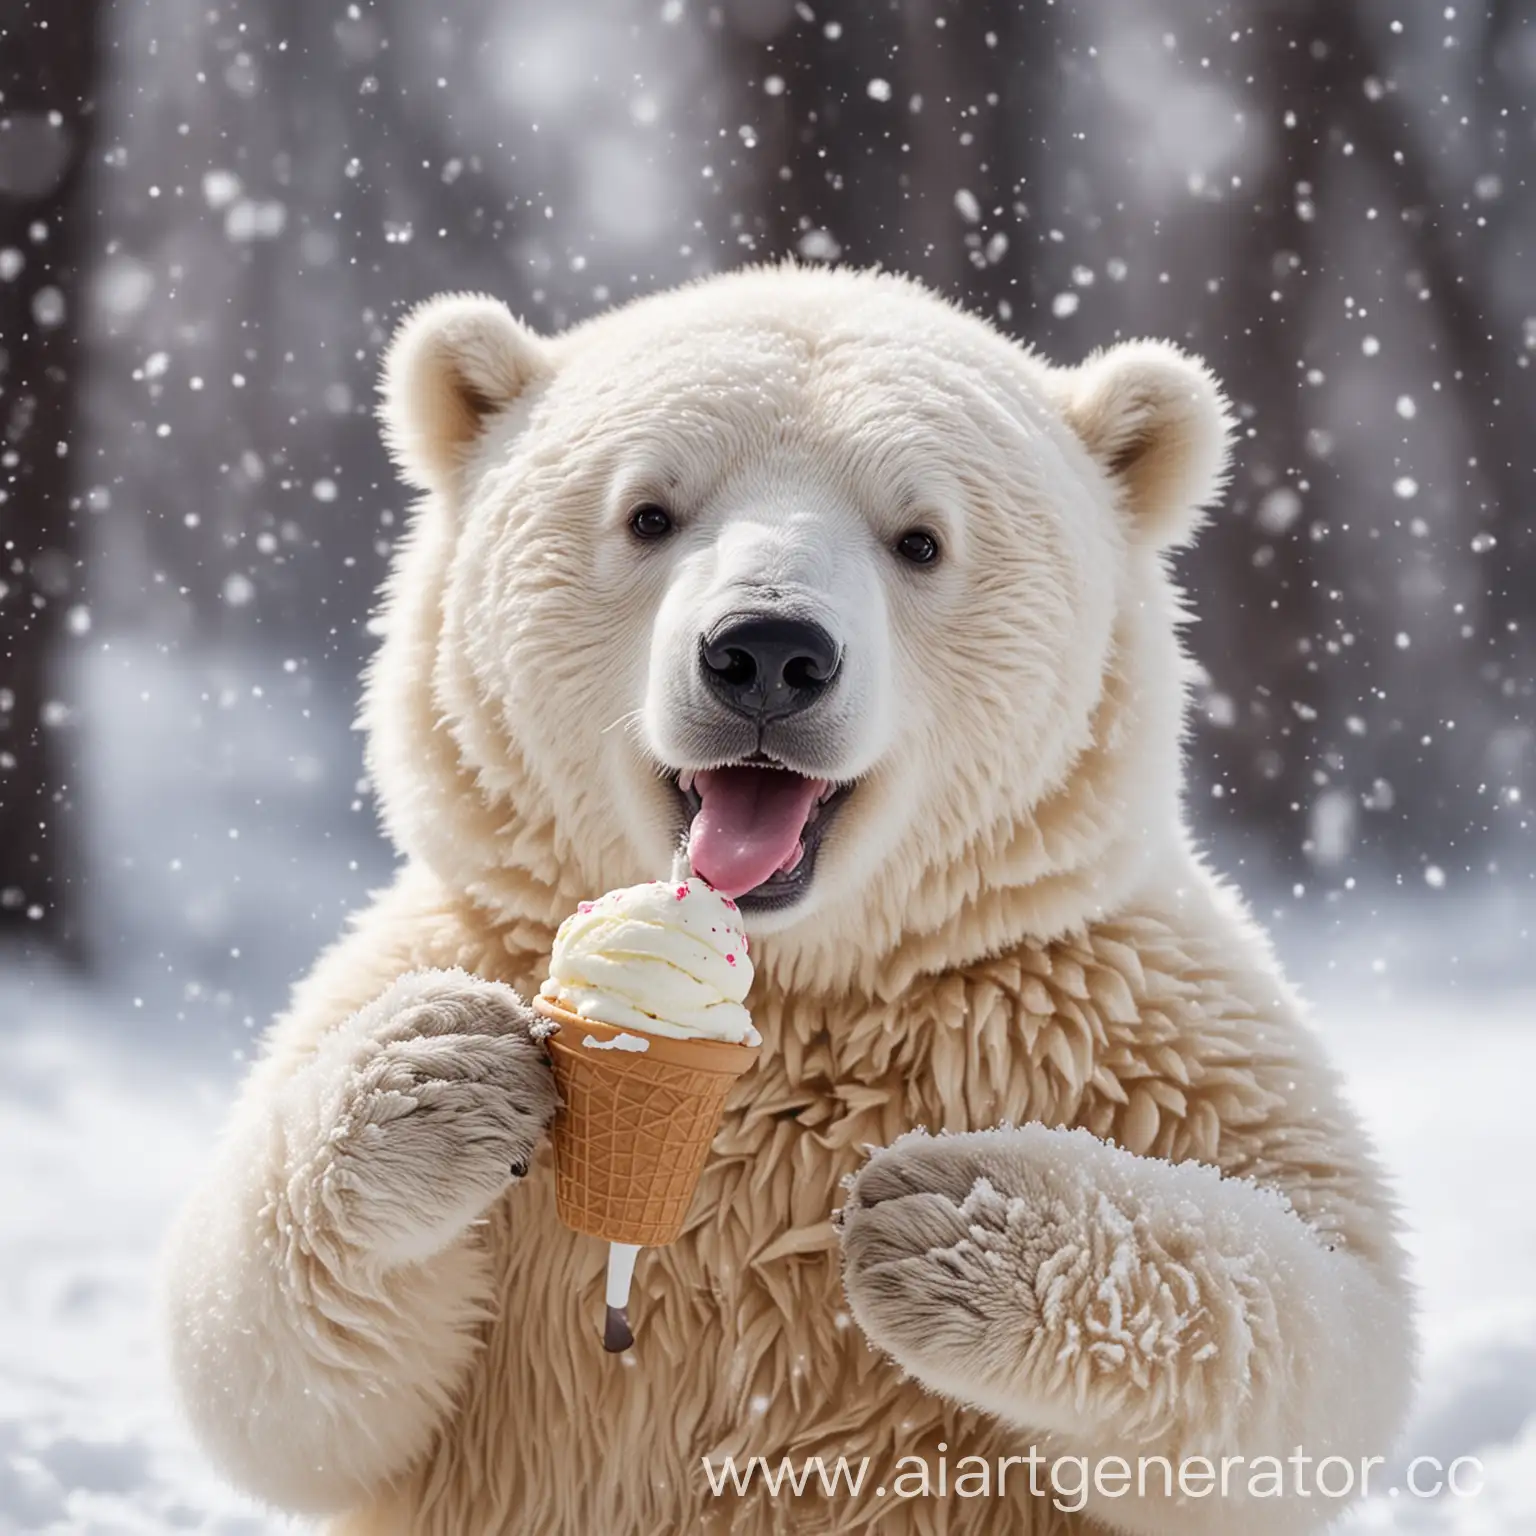 White bear eats ice cream in a little cup and smiles, snow, ice